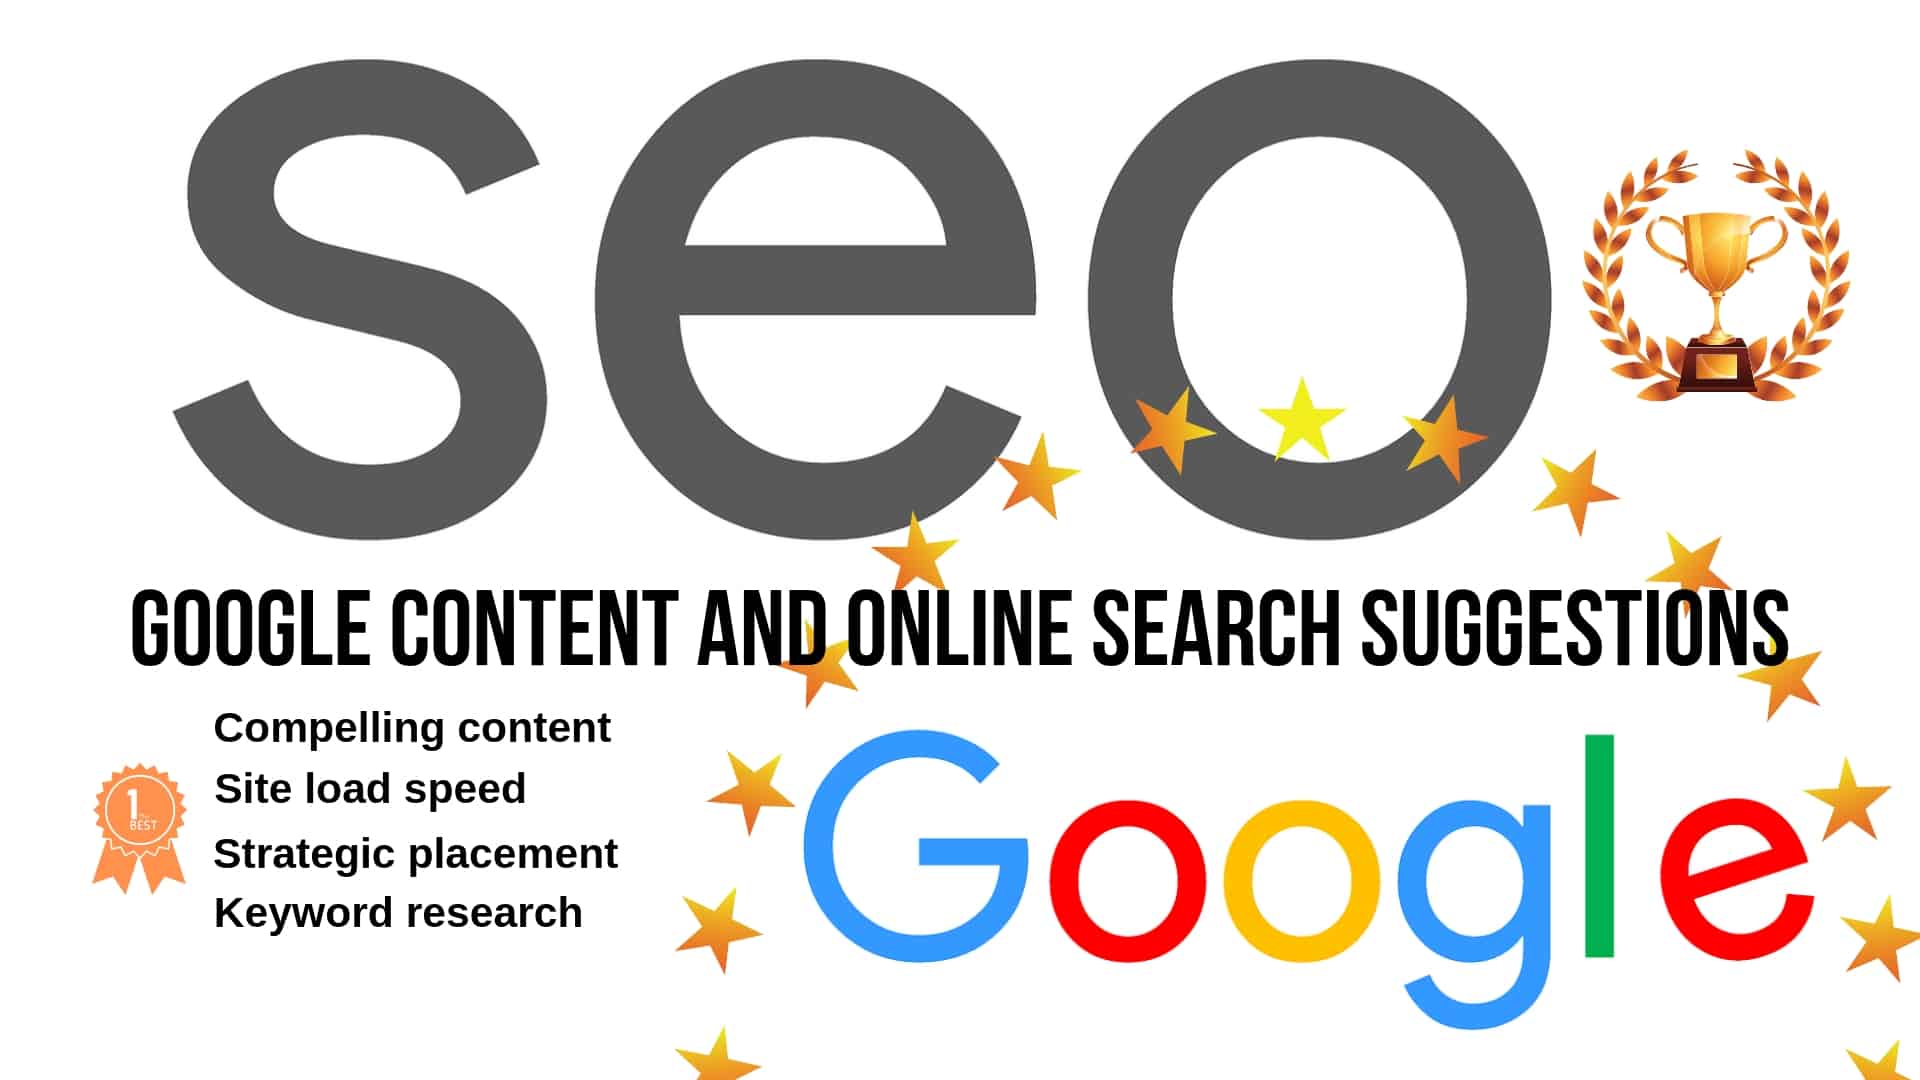 Google content and online search suggestions